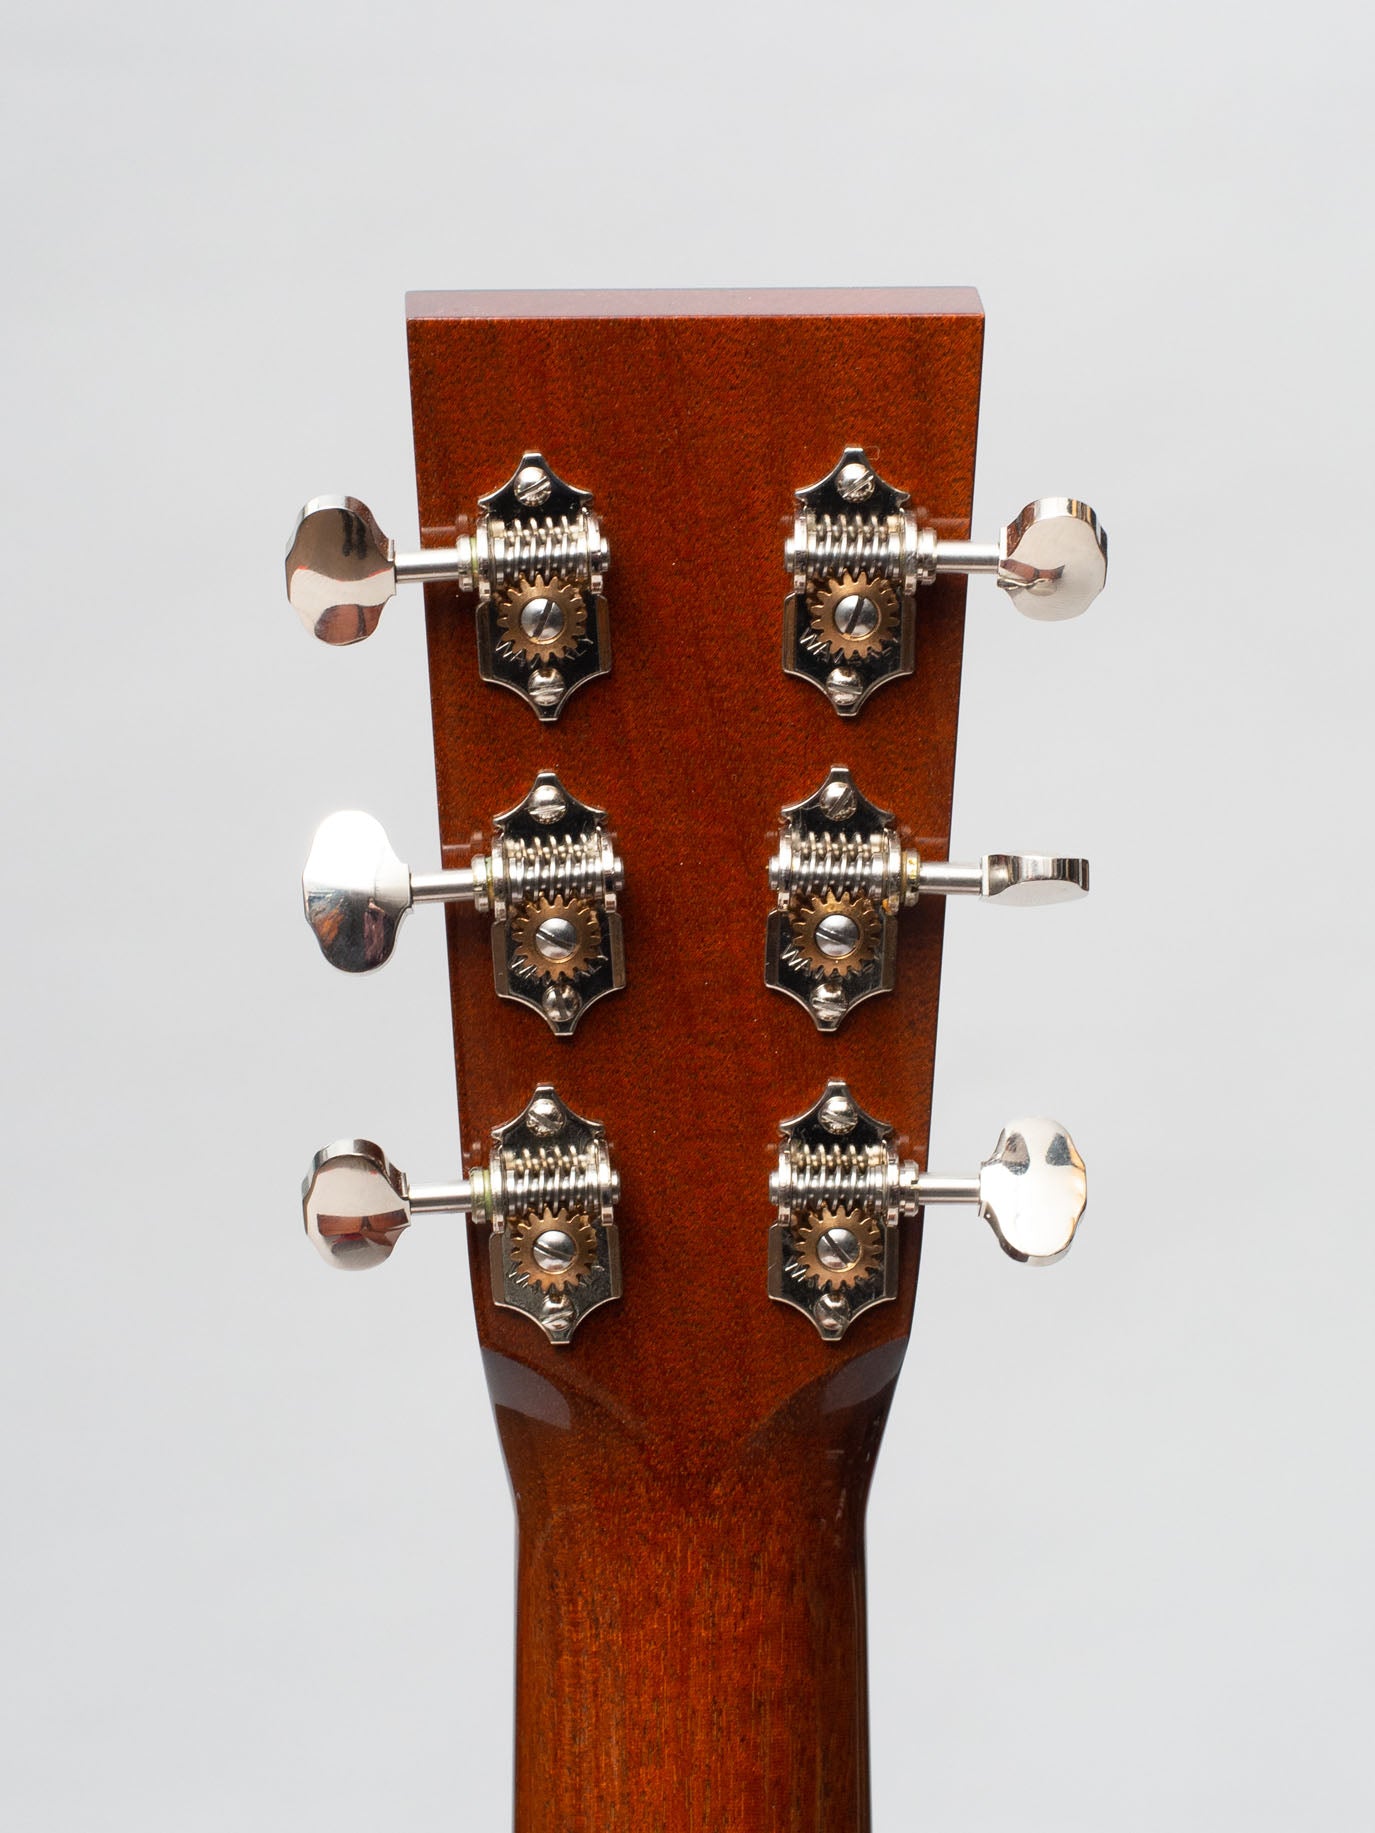 2019 Collings D1AT SN 30138